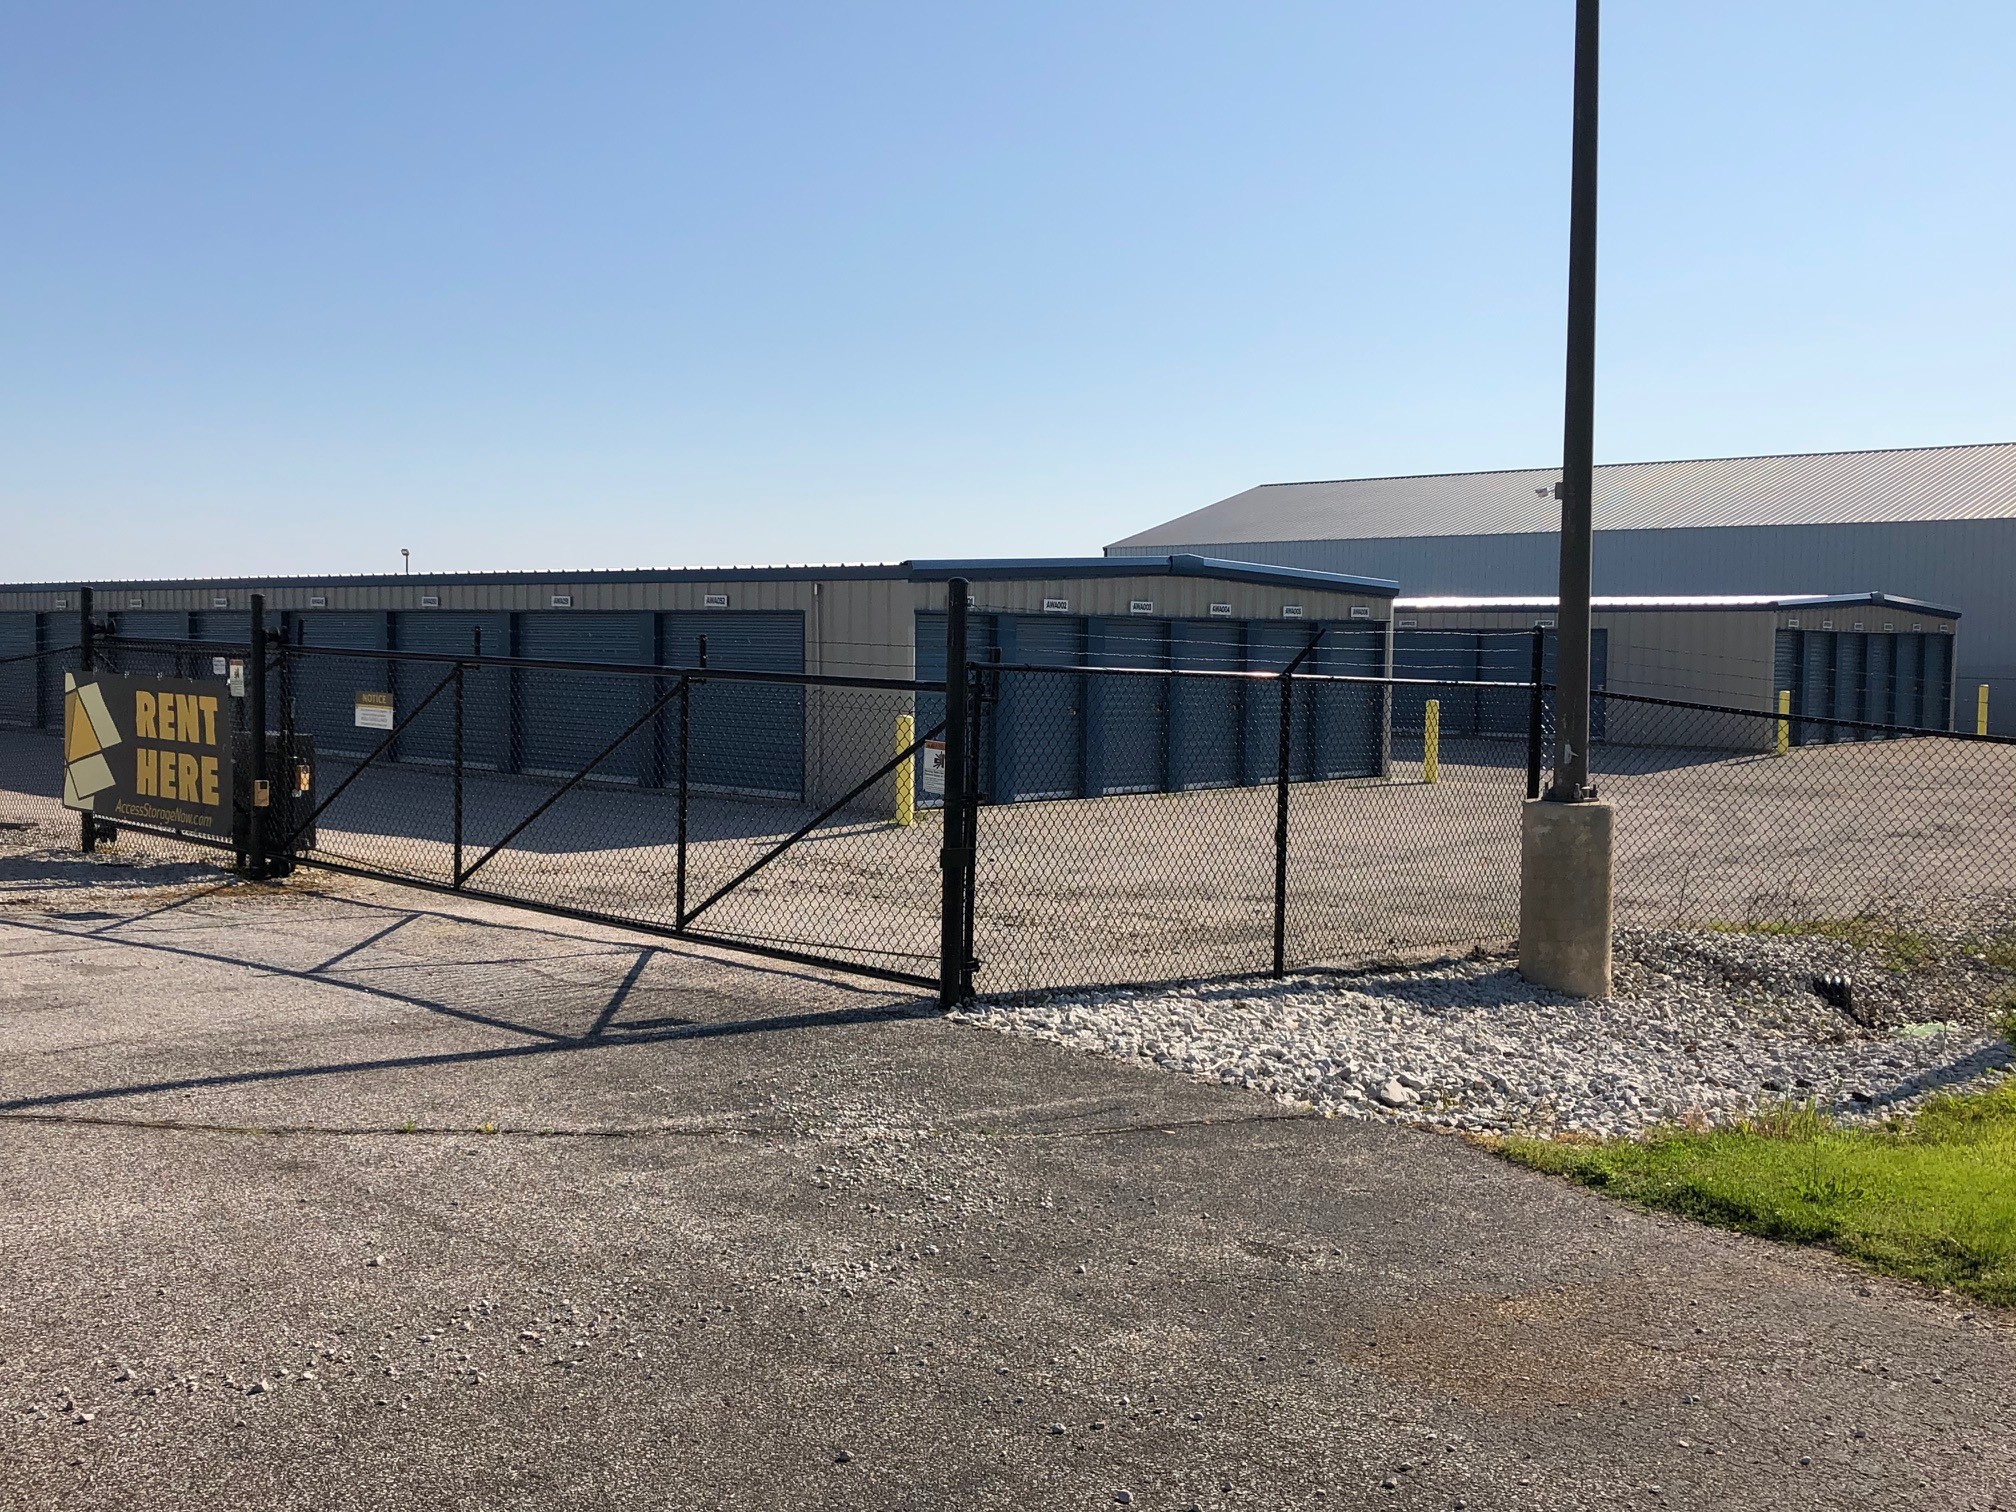 Fully fenced property with secure gate access at Washington, IN Access Storage, ensuring top-notch security and peace of mind.